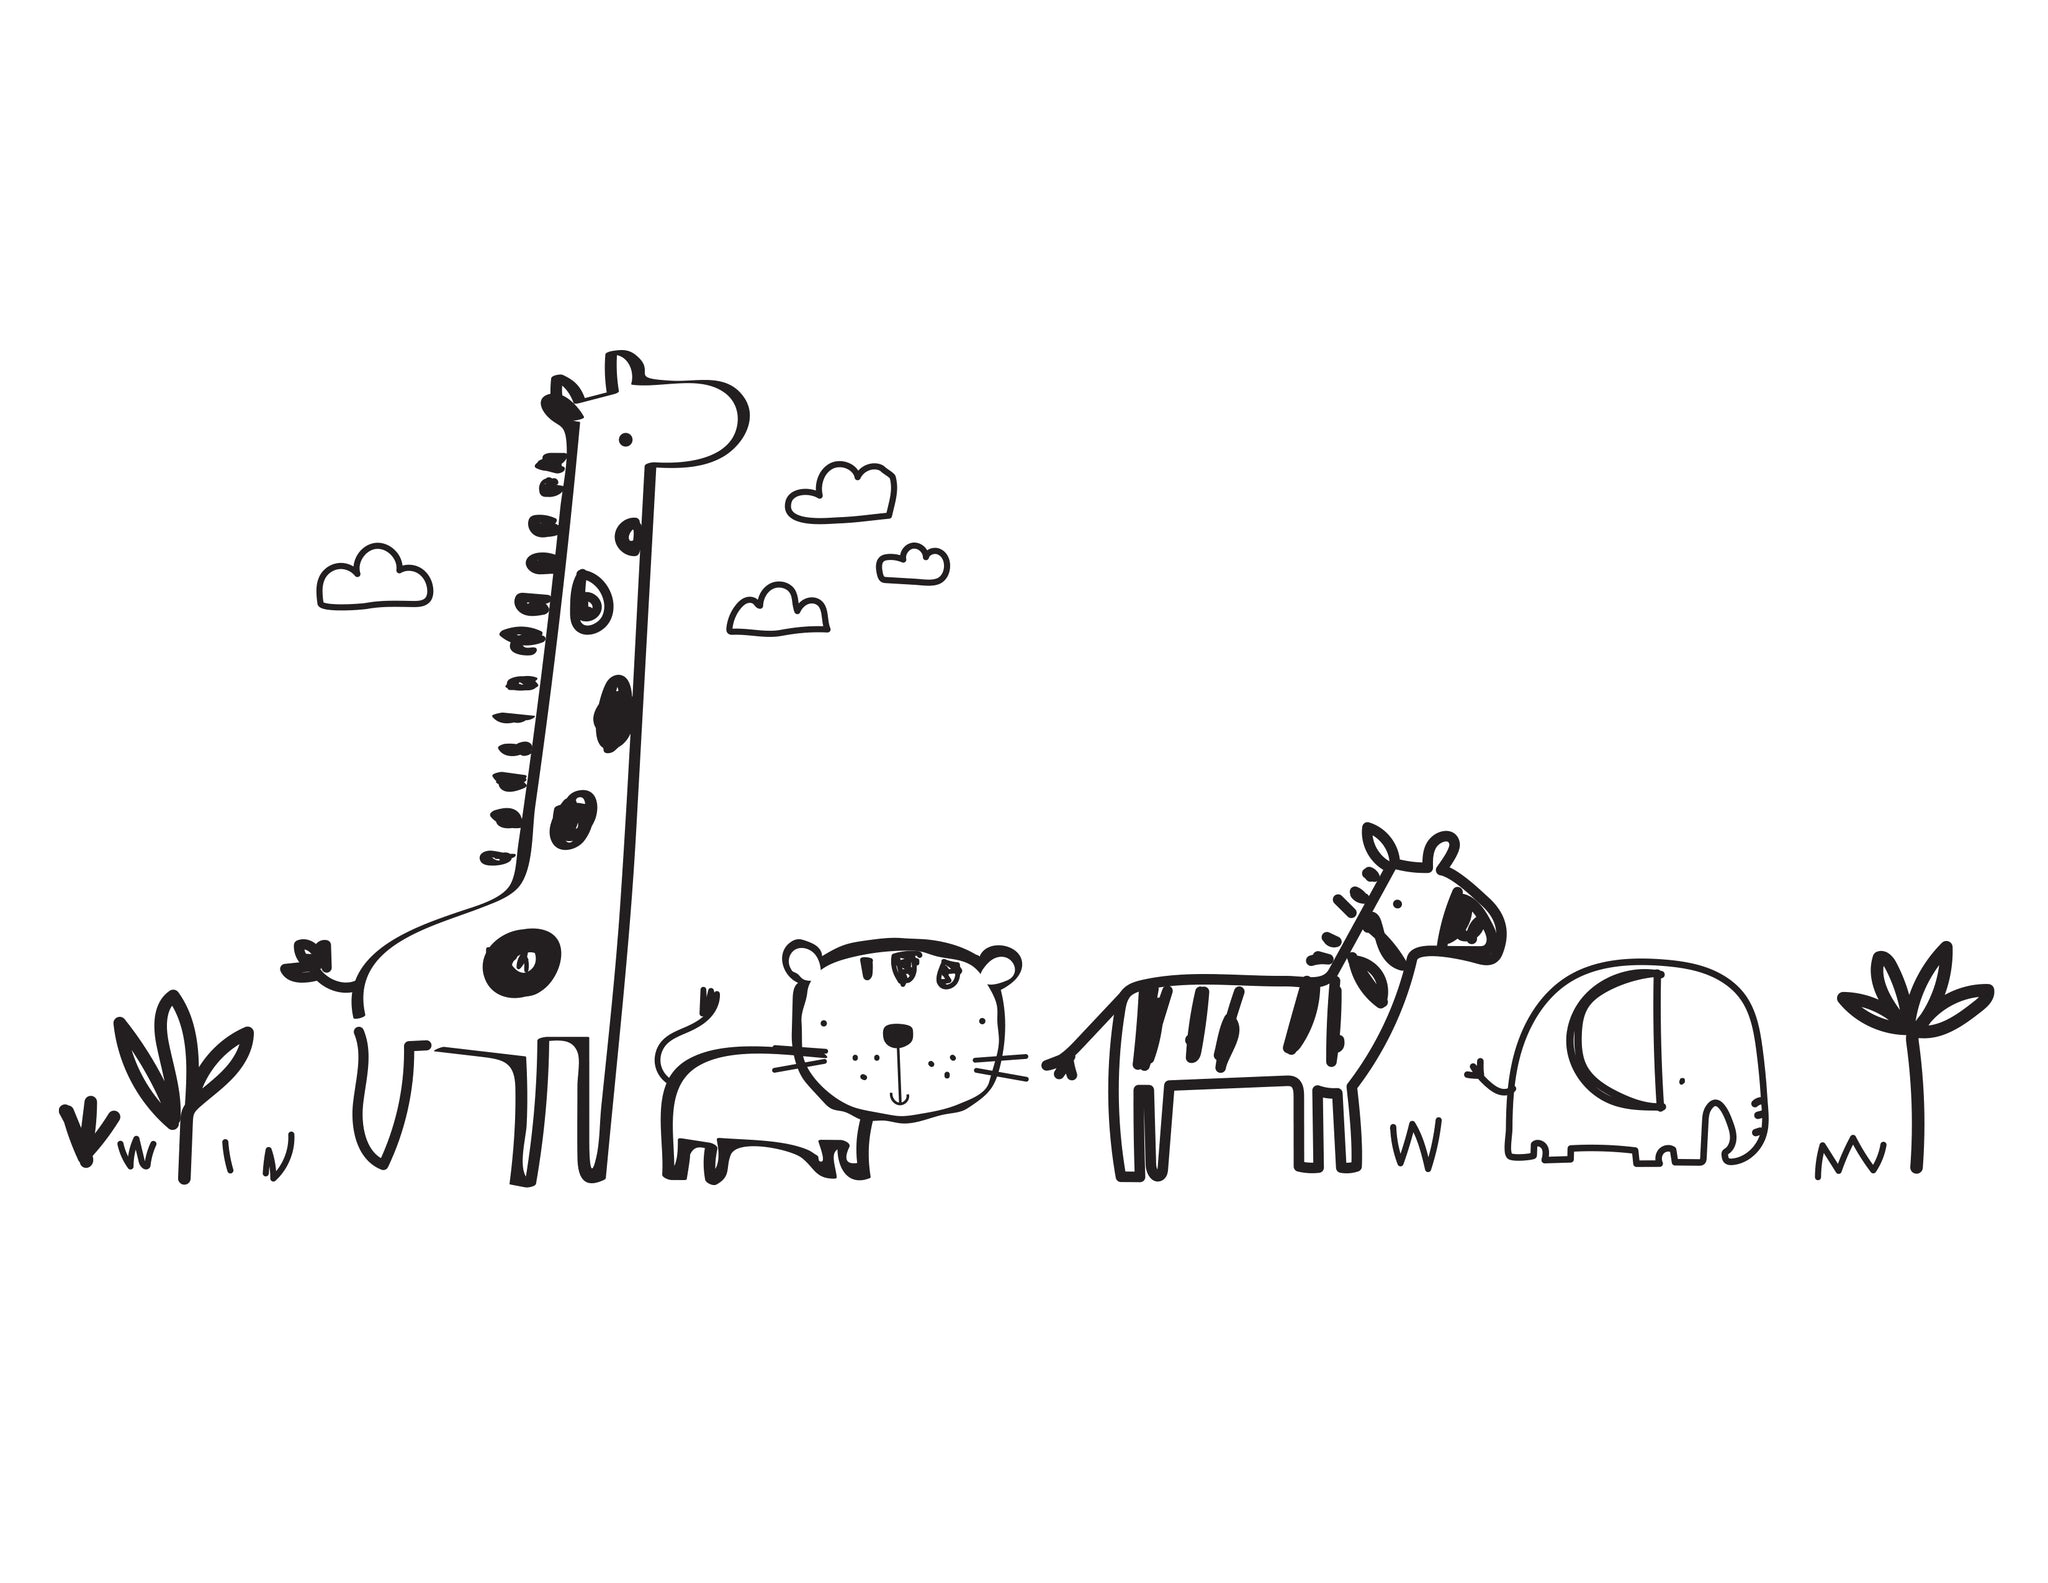 Coloring sheet featuring animals: Giraffe, tiger, zebra and elephant